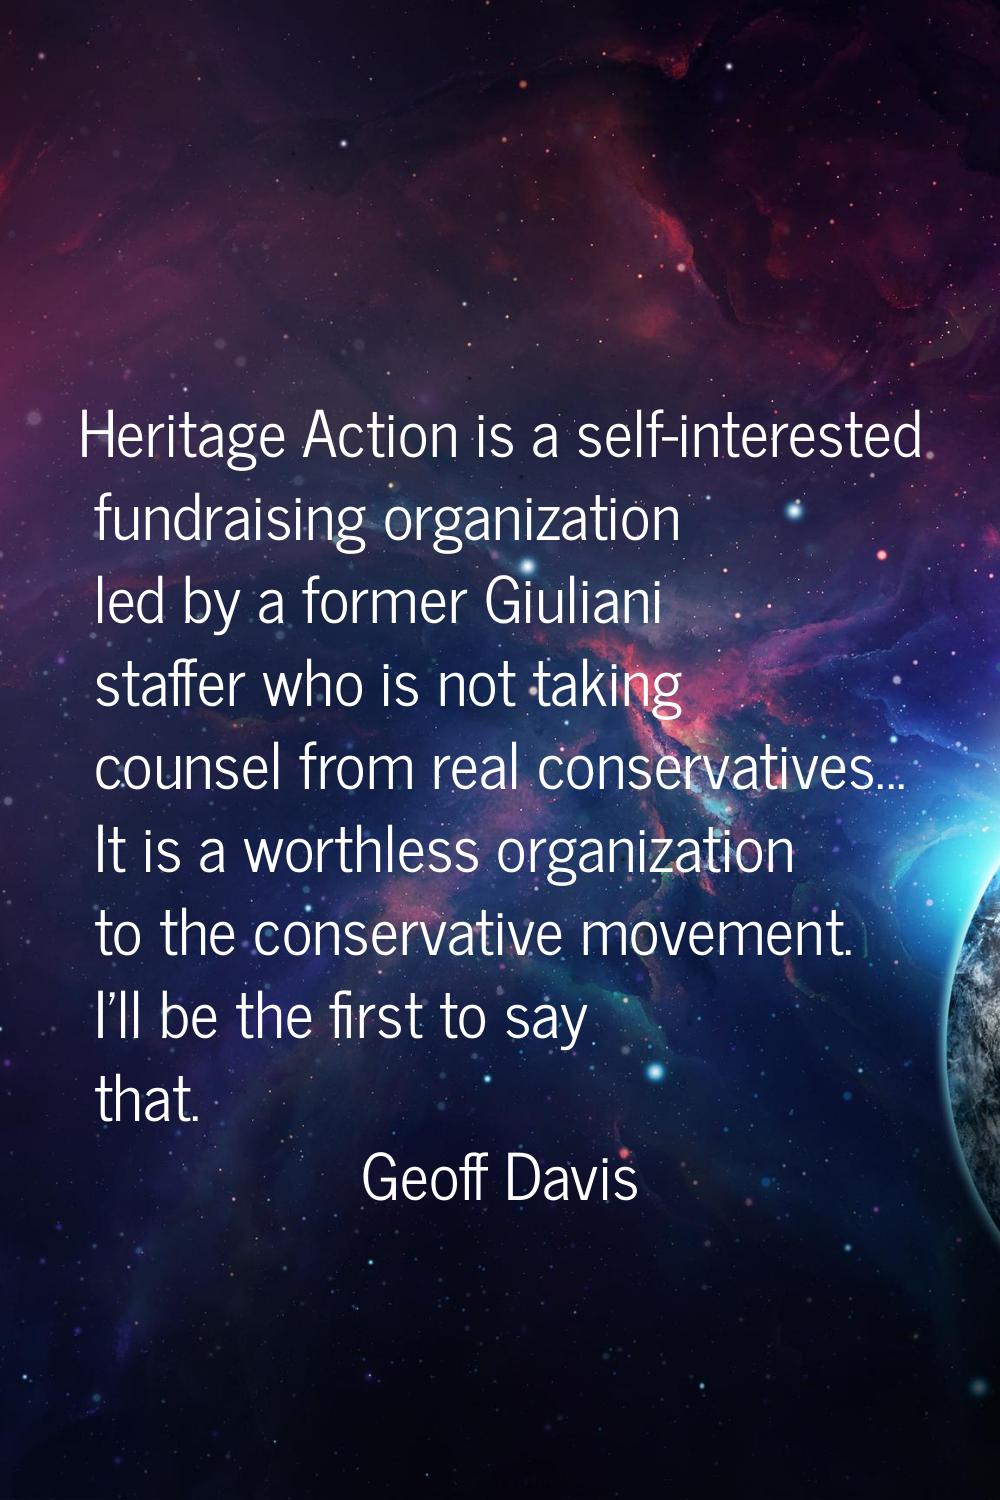 Heritage Action is a self-interested fundraising organization led by a former Giuliani staffer who 